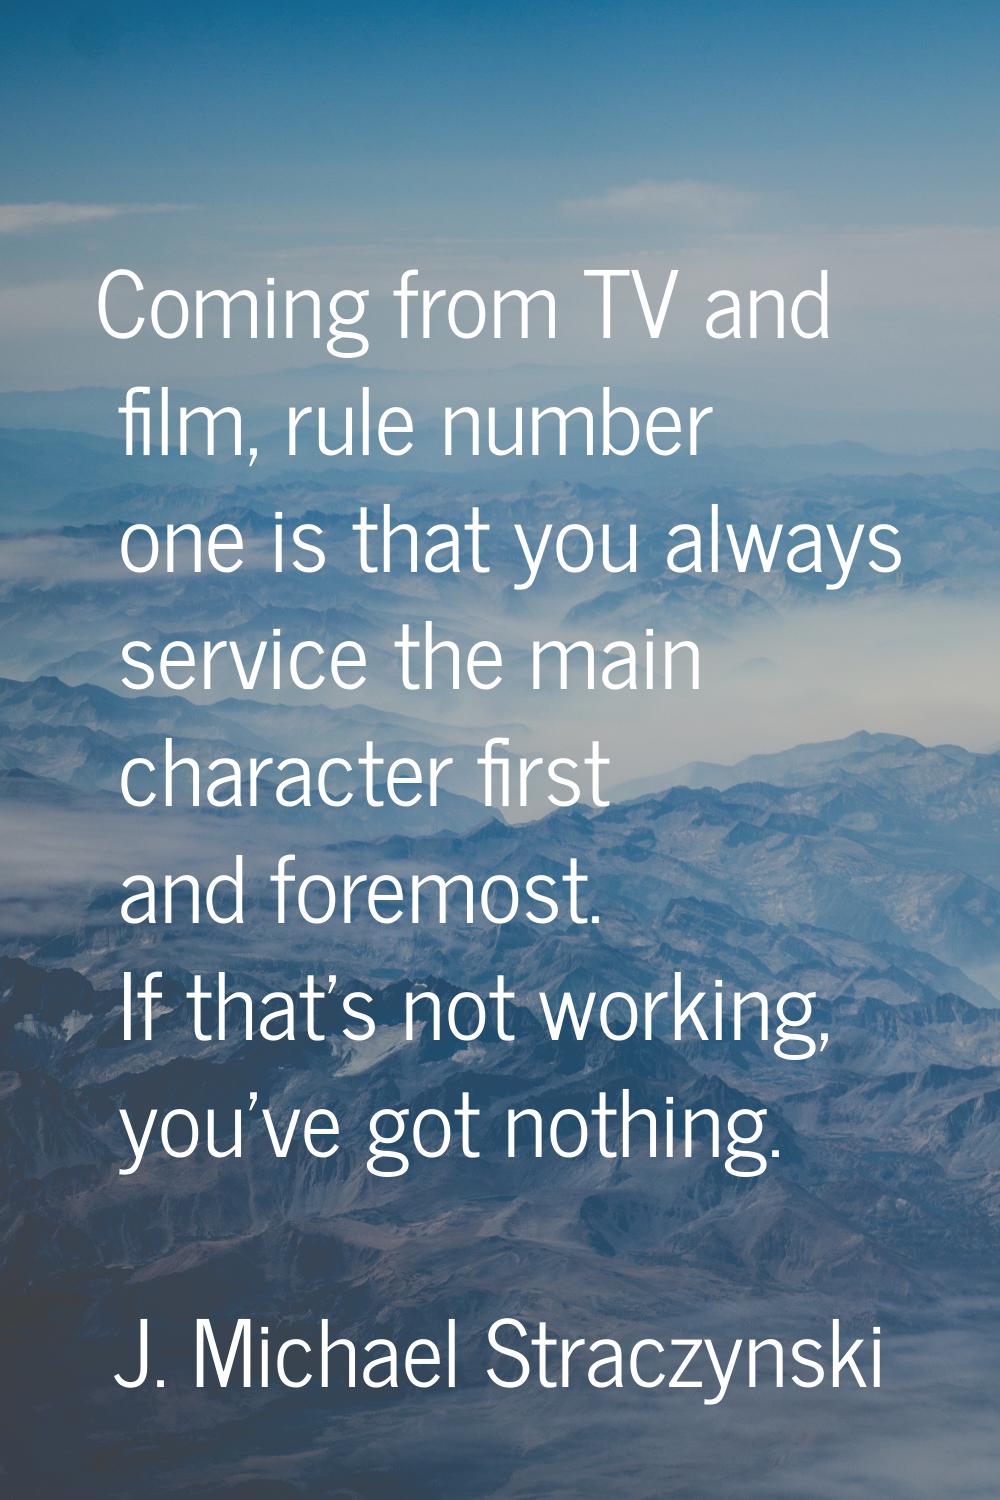 Coming from TV and film, rule number one is that you always service the main character first and fo